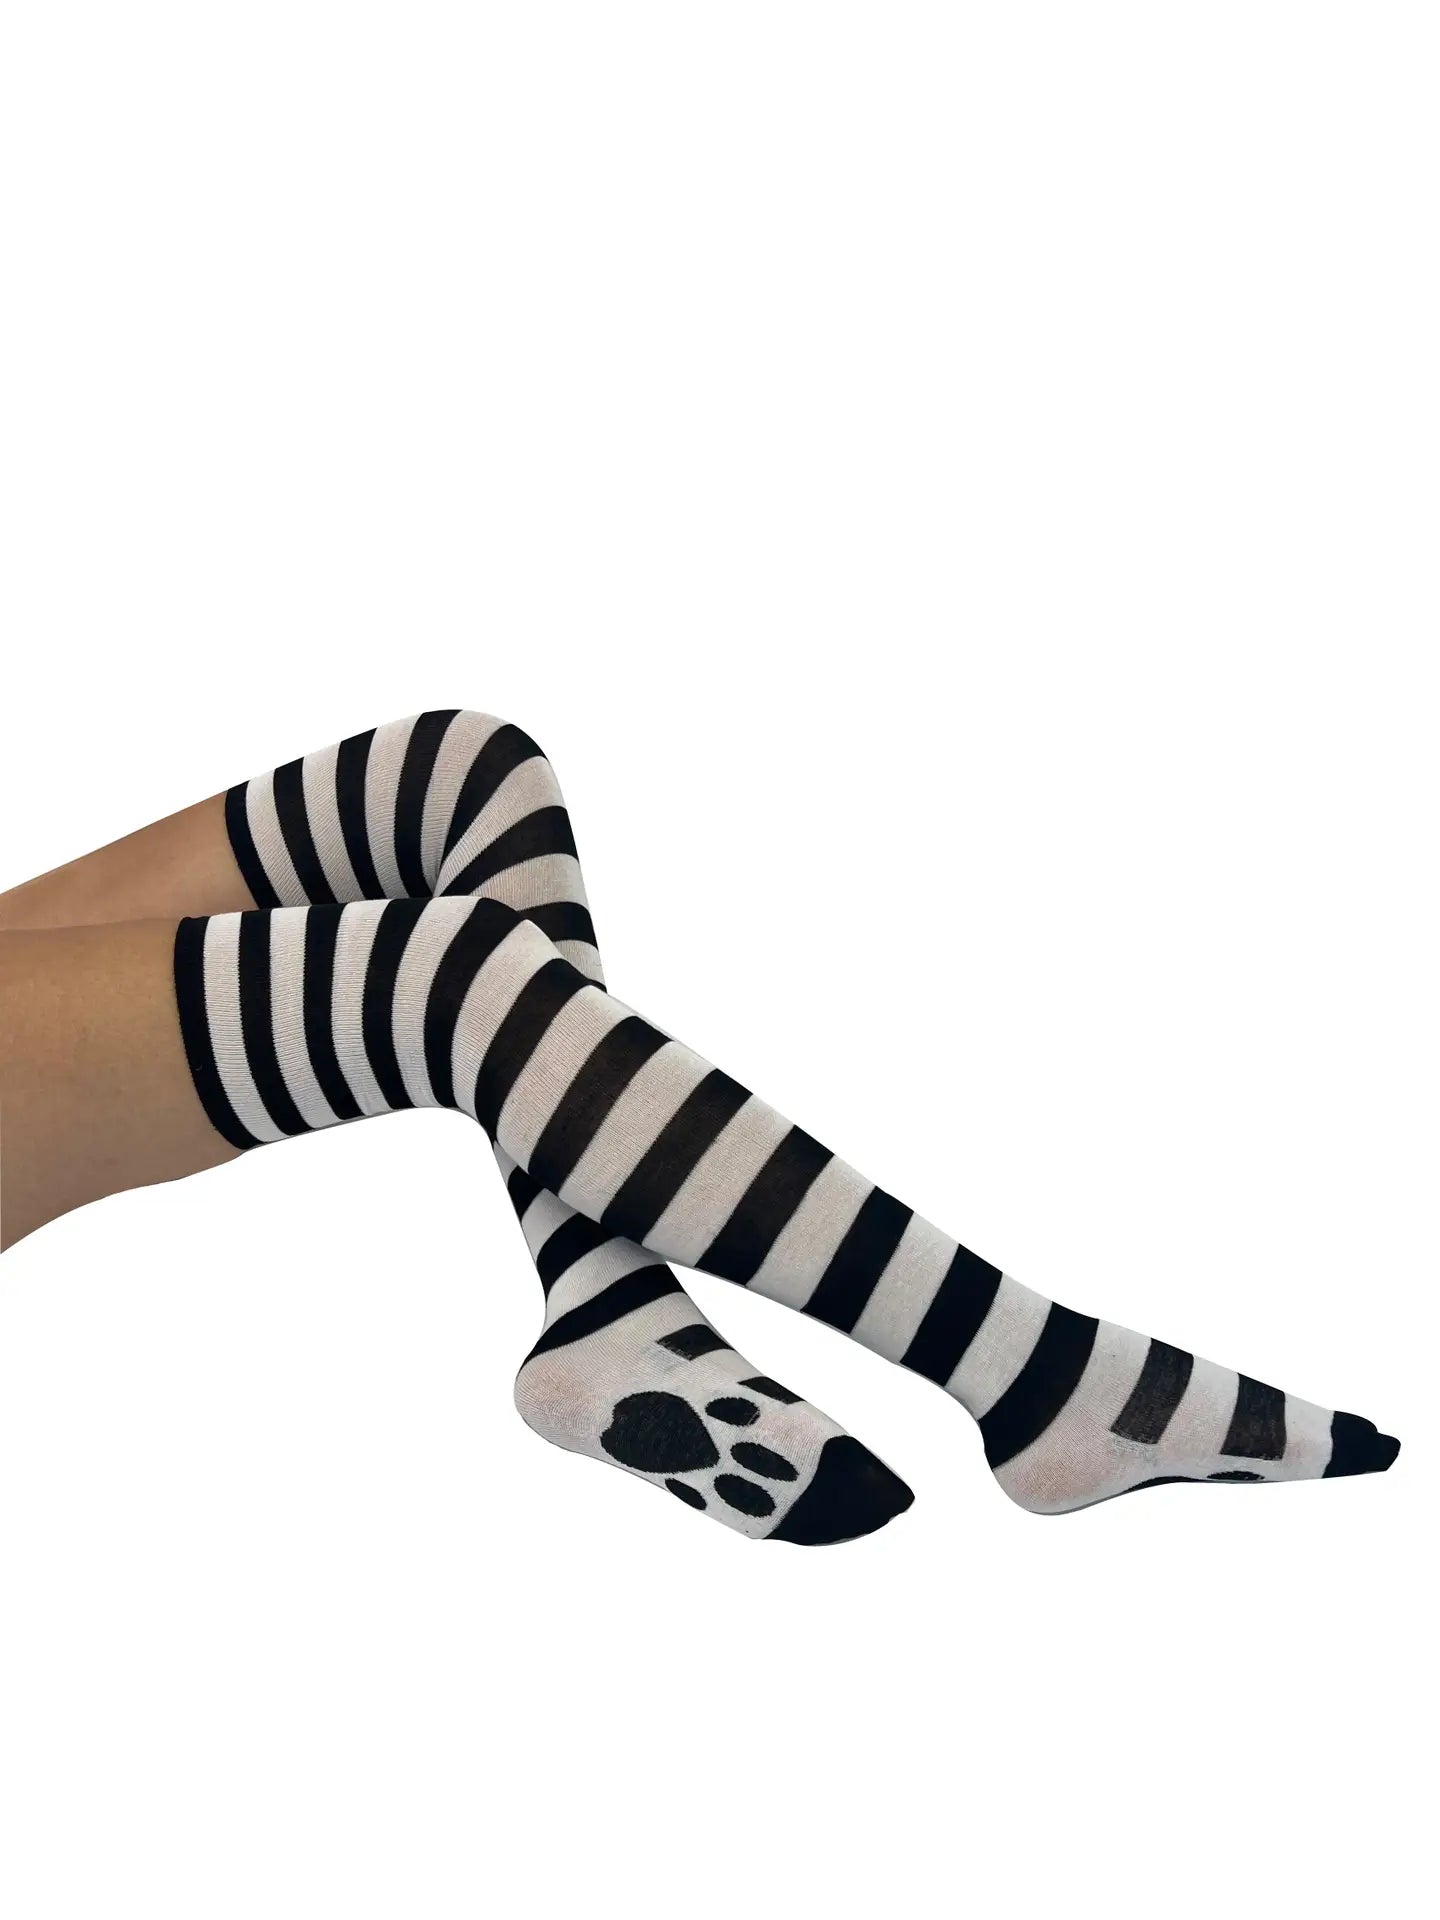 Striped Over the Knee Socks in White and Black - With Cat Paw - The Sockery